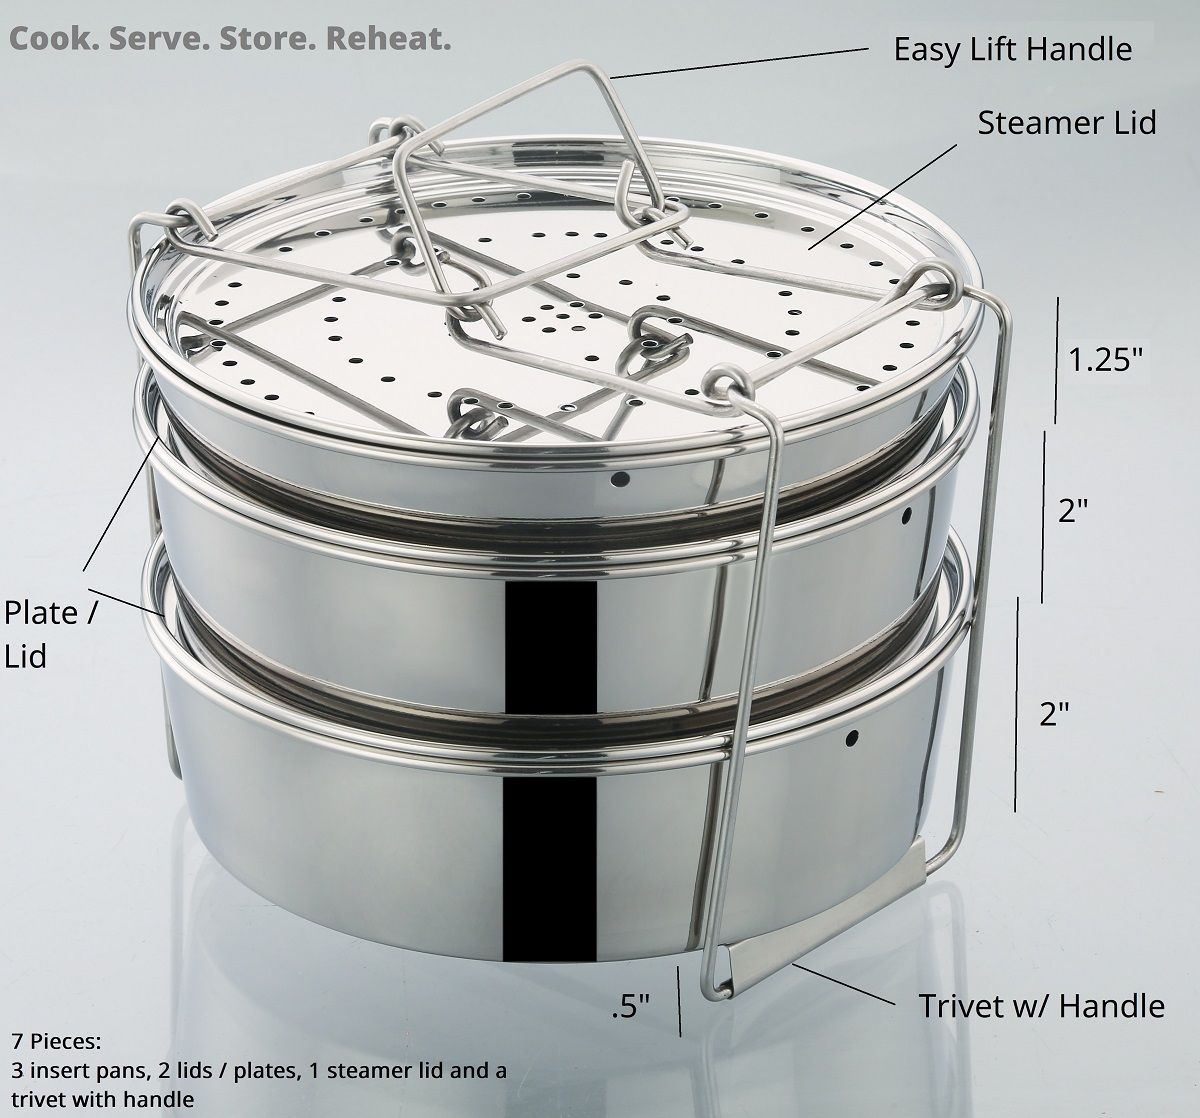 3 Tier Stainless Steel Steamer Pot For Cooking With Stackable Pan